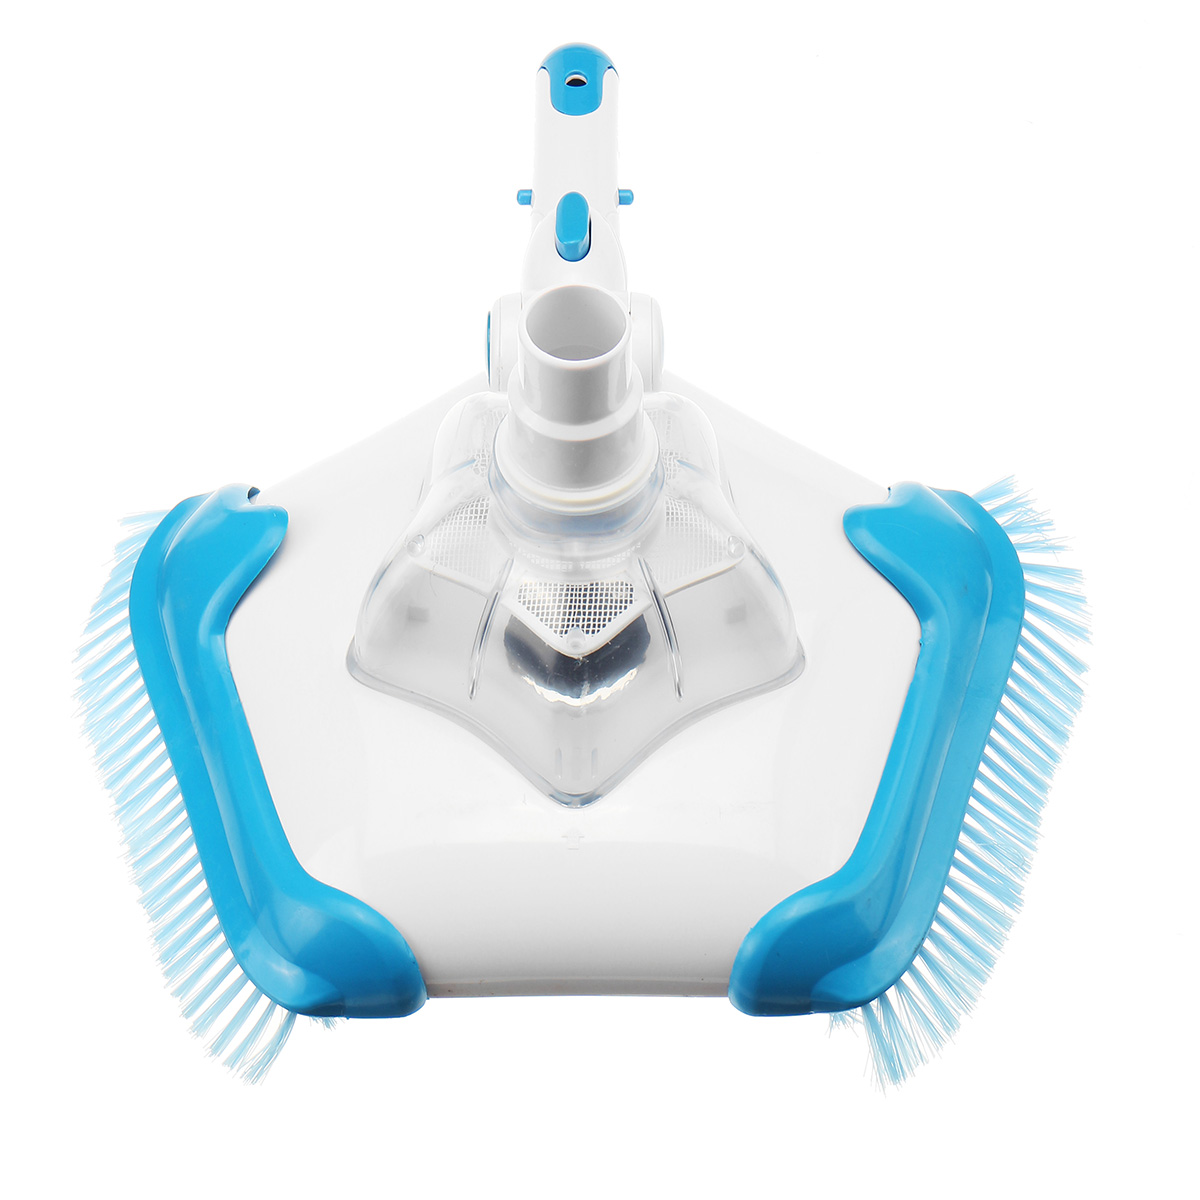 Swimming-Pool-Cleaner-Portable-Swimpool-Vacuum-Brush-Cleaner-Cleaning-Tool-1817263-2